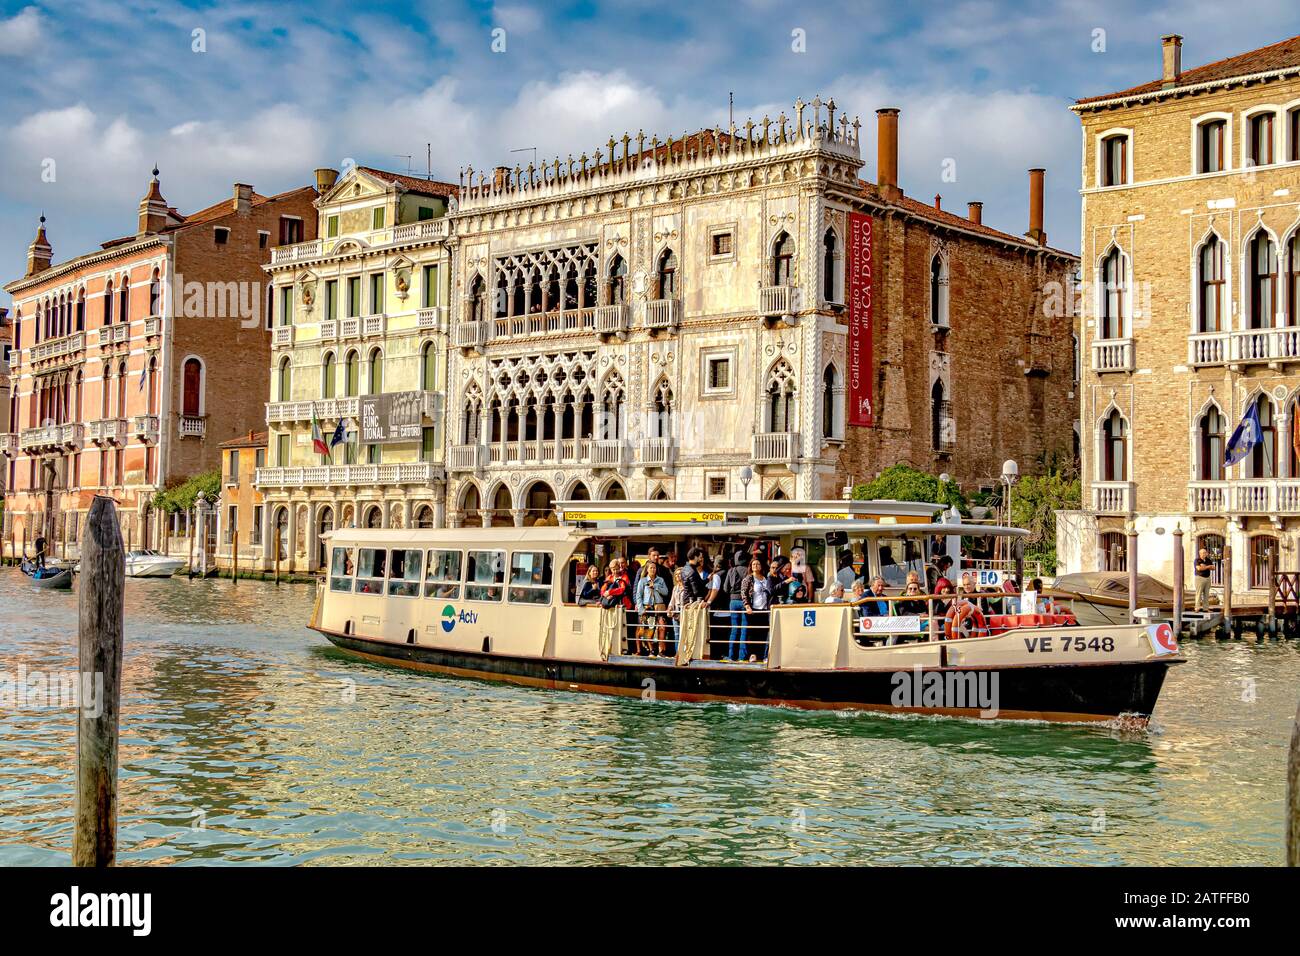 A route 2 Vaporetto busy with passengers,passing the Ca' d'Oro, a Venetian Gothic palace on The Grand Canal ,in the Cannaregio district ,Venice Italy Stock Photo